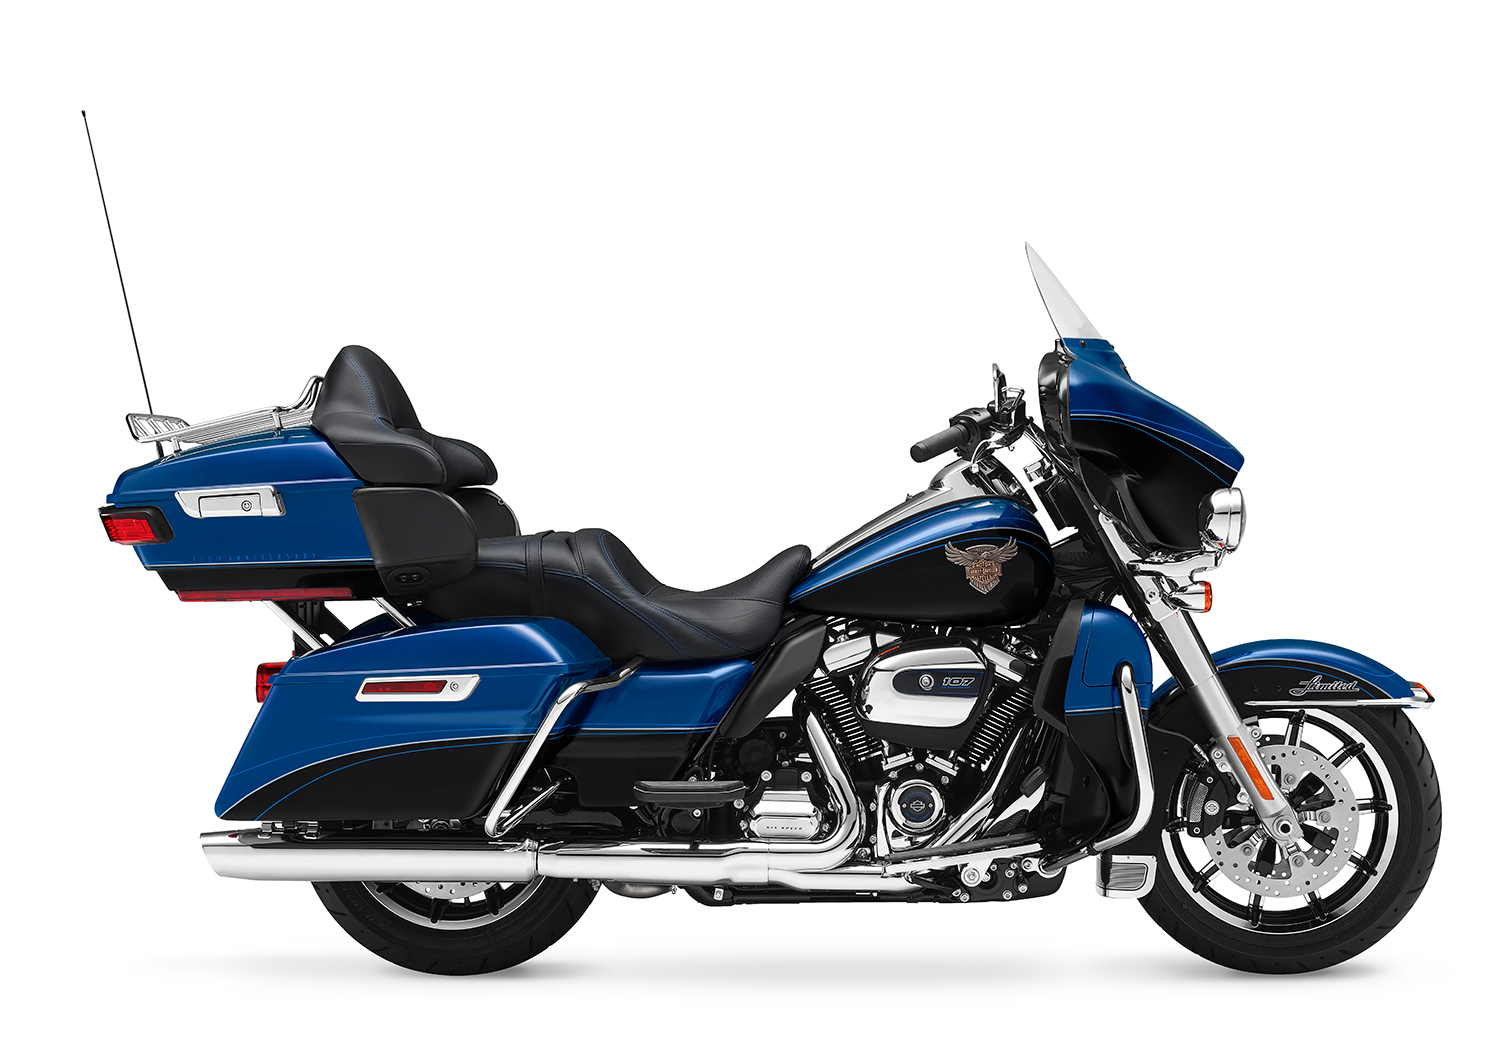 2018 FLHTK ANV Electra Glide Ultra Limited Anniversary. Touring